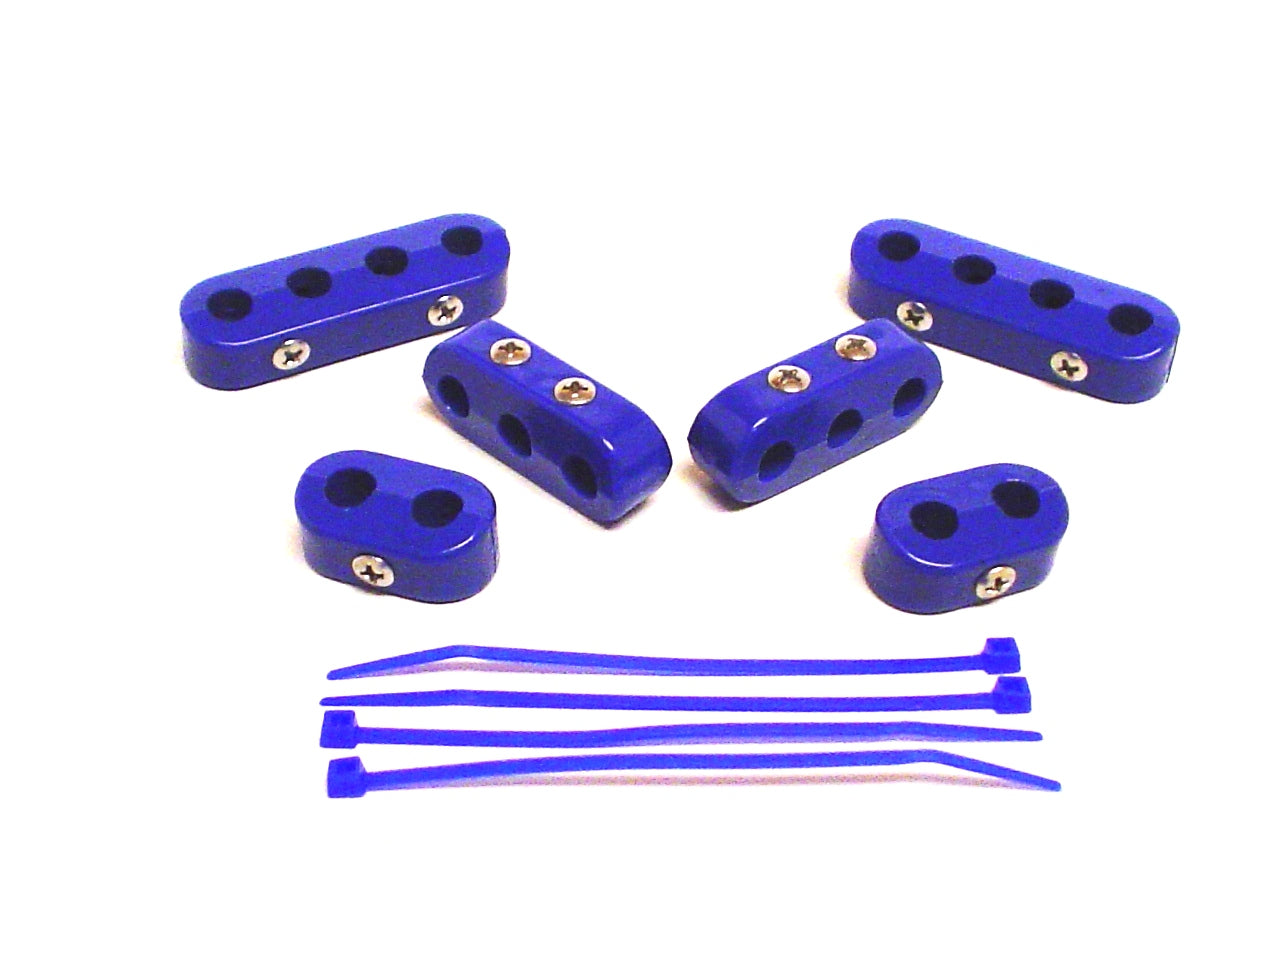 Taylor Cable 42760 7-8mm Separators Clamp Style blue